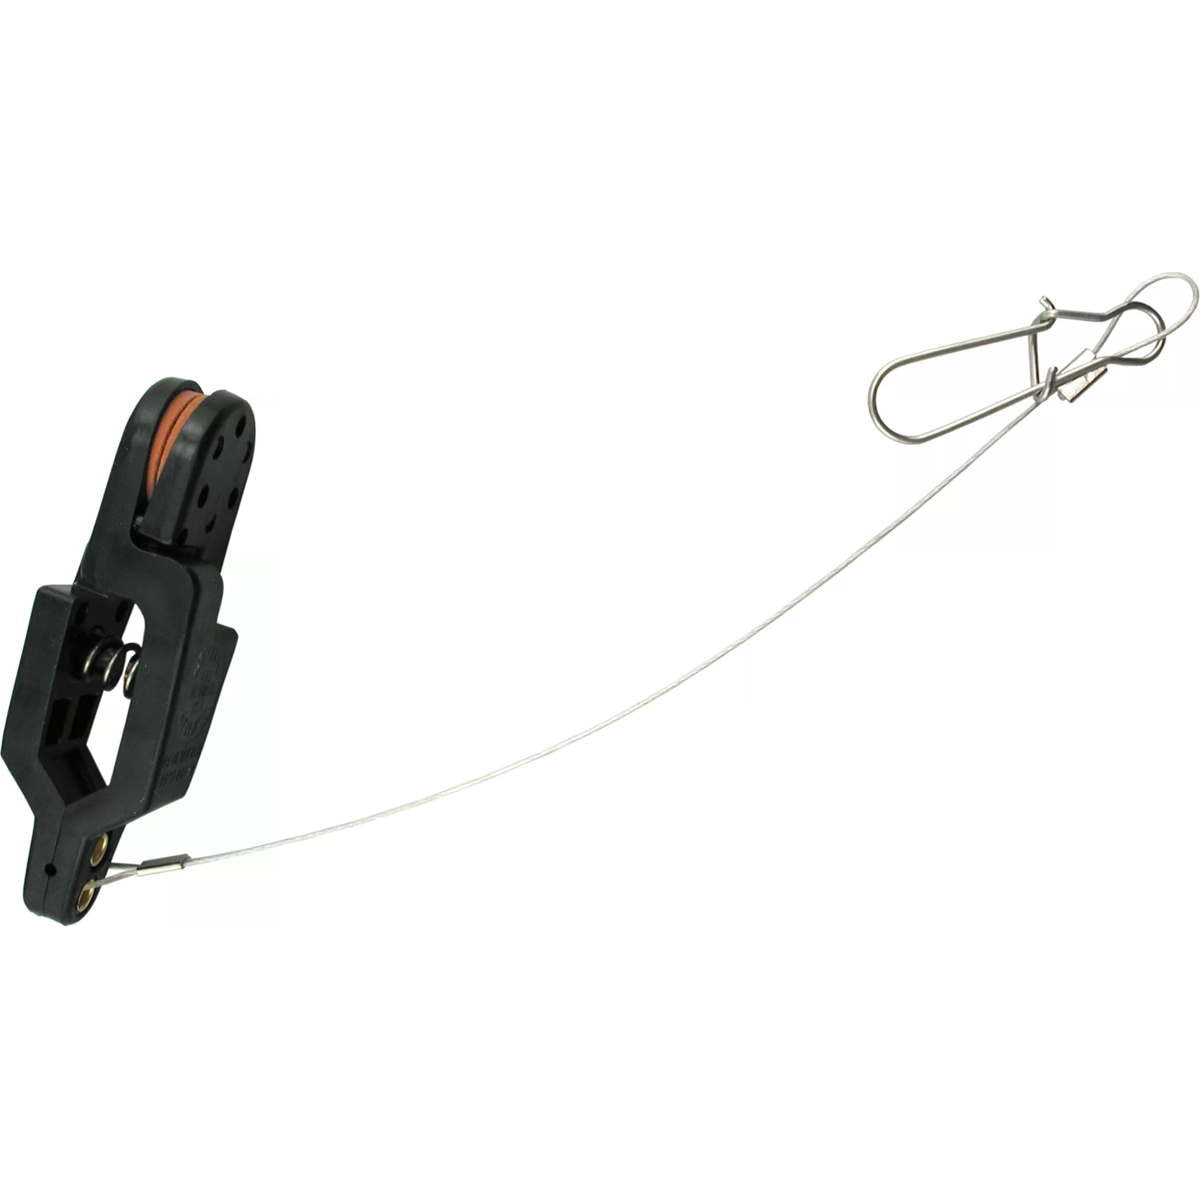 Photo of Off Shore Tackle Medium Tension Single Downrigger Release for sale at United Tackle Shops.